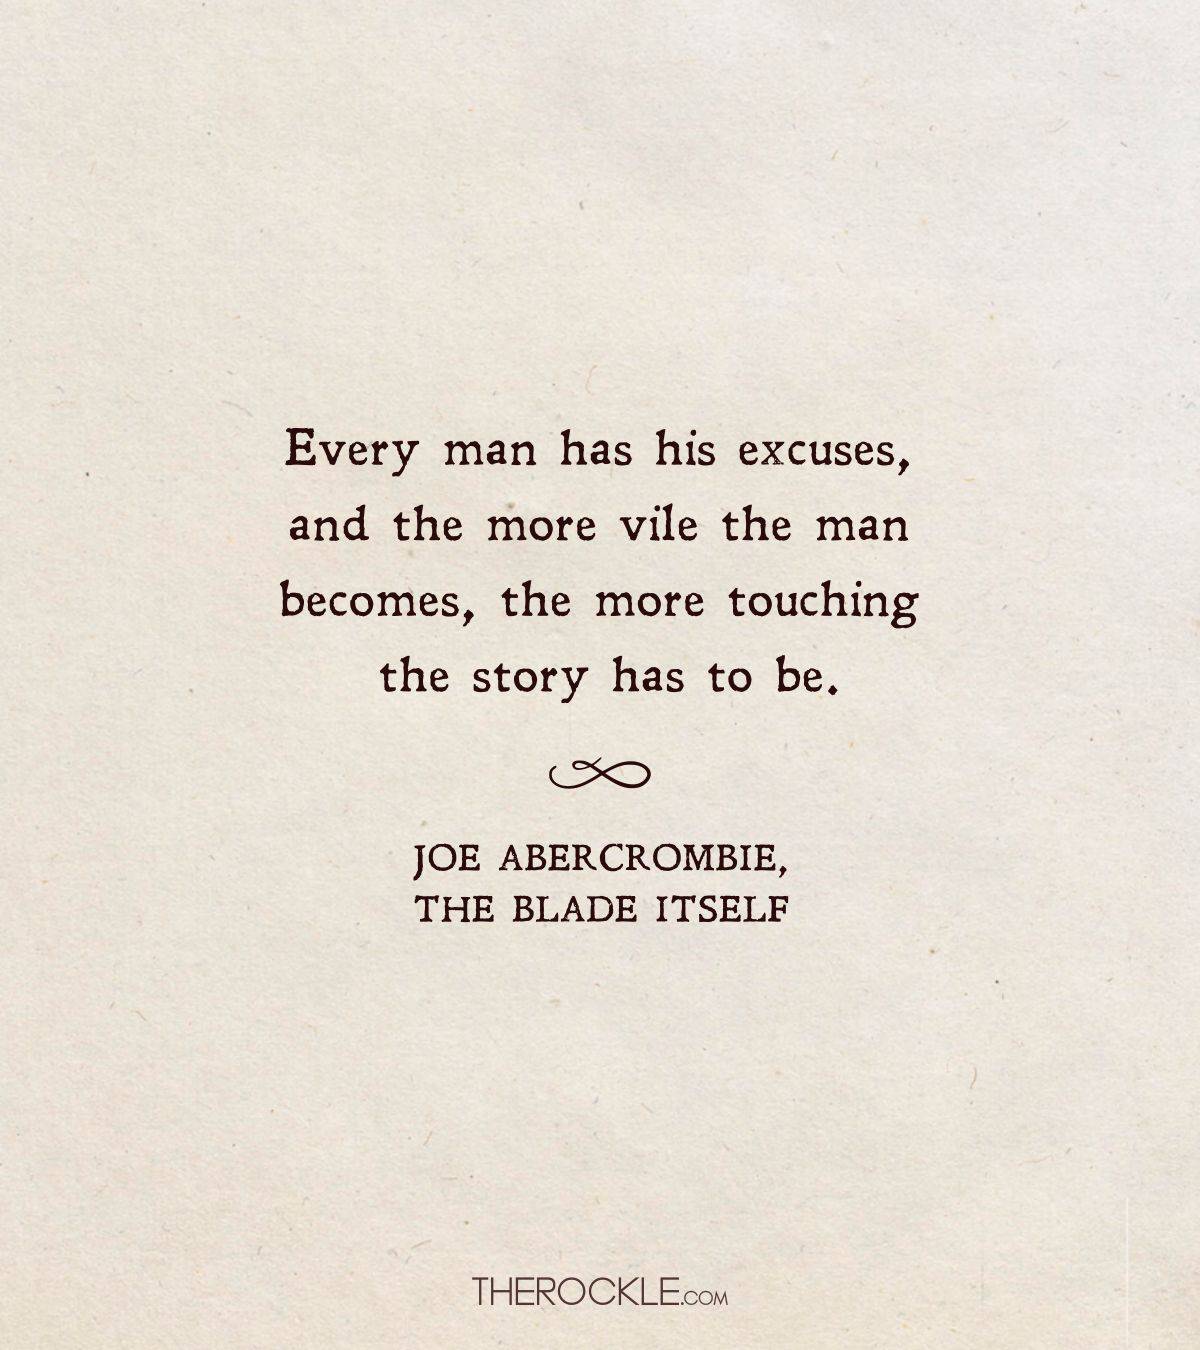 Abercrombie on how excuses reveal person's character